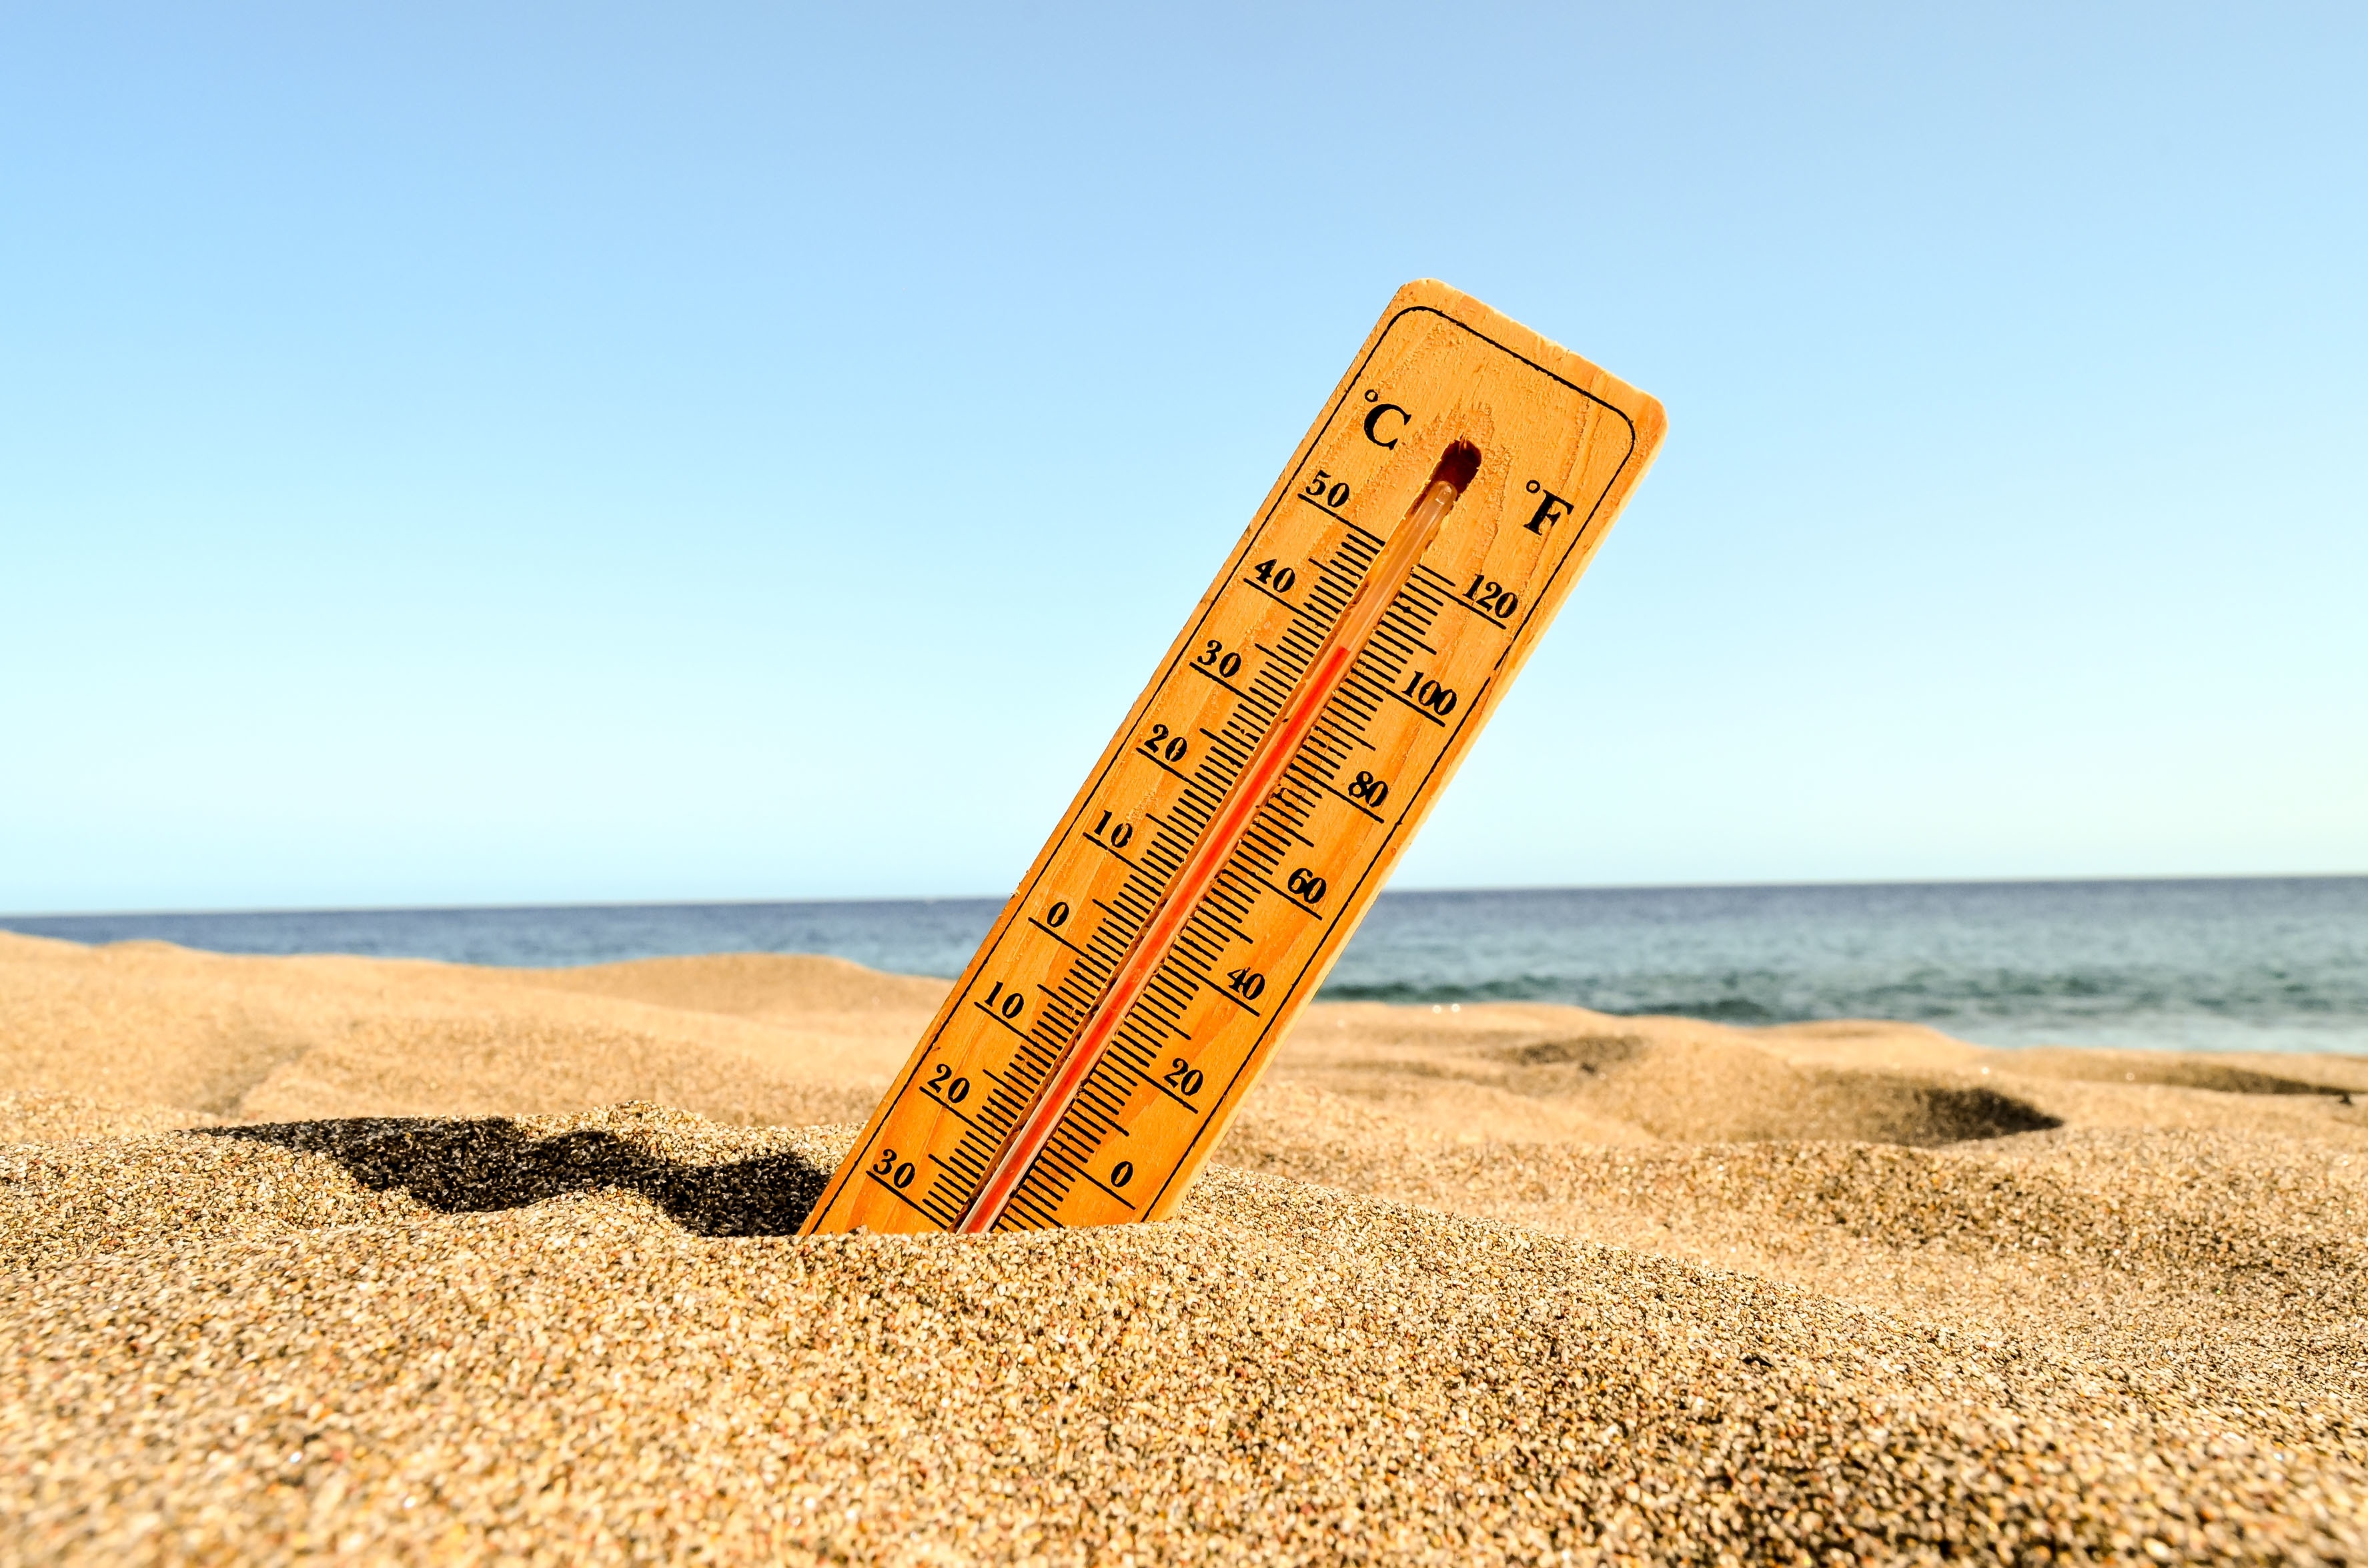 A thermometer stuck in the sand at a beach, displaying a high temperature reading on a clear sunny day, symbolizing a heatwave.